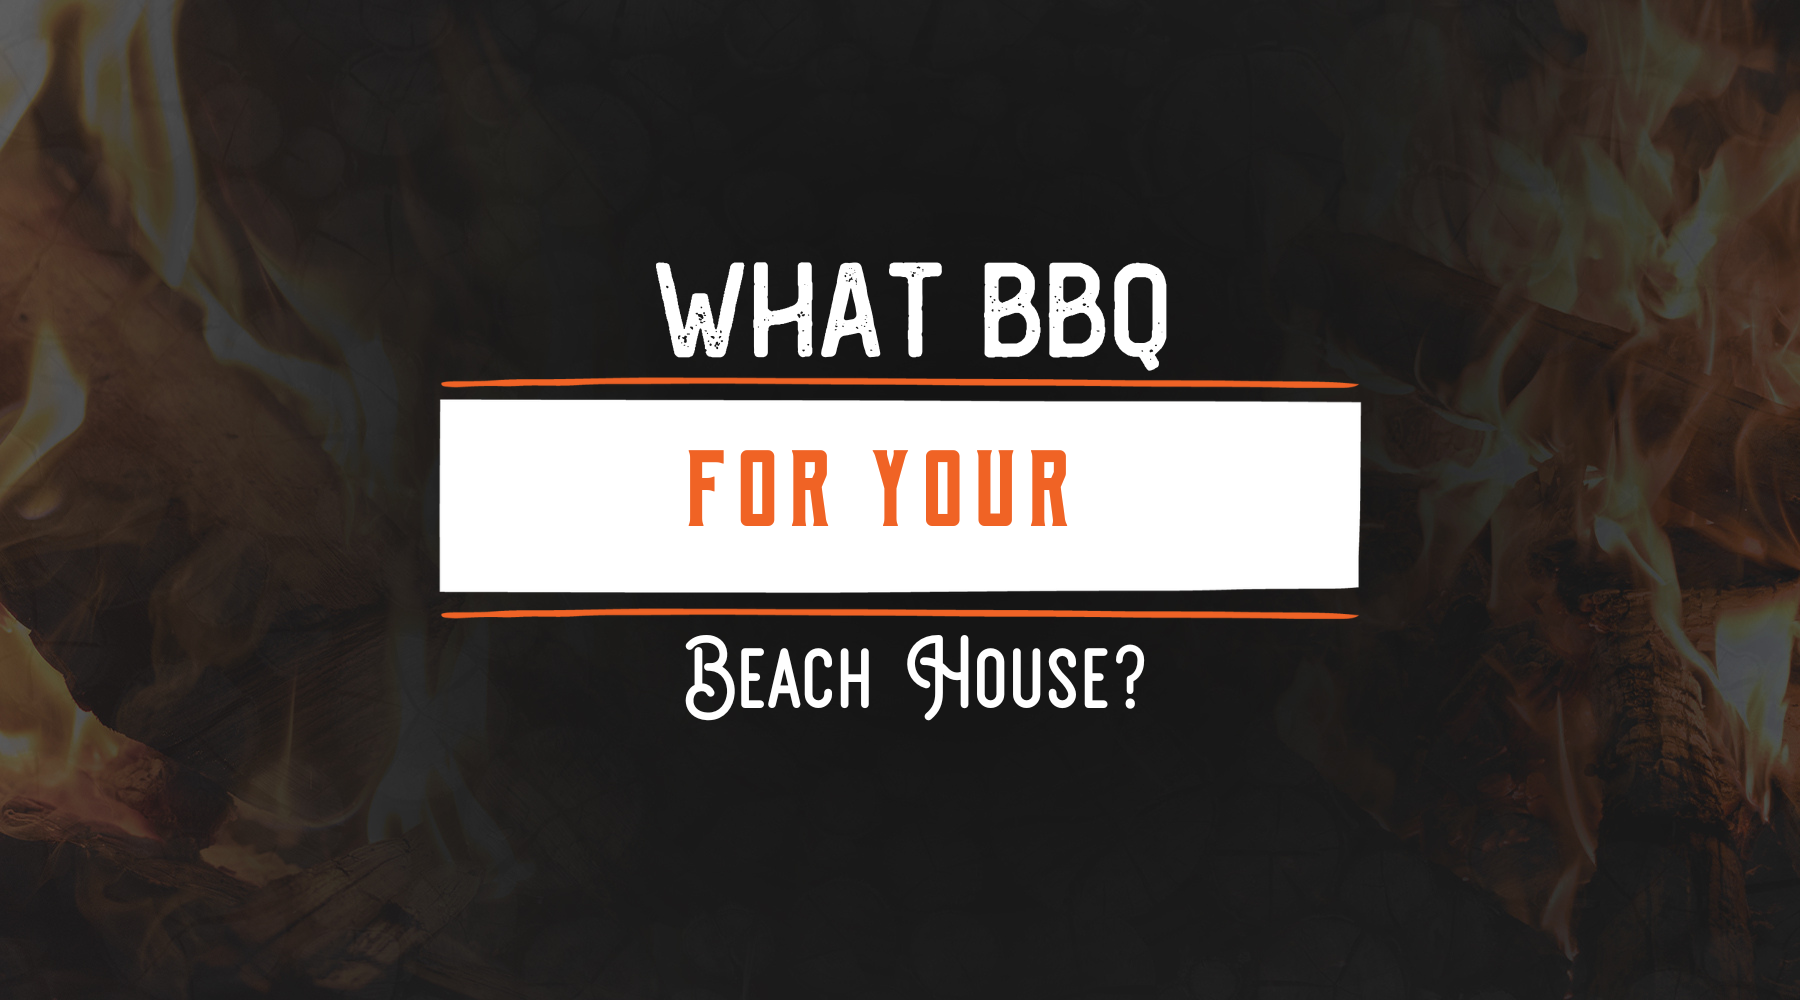 Let the best BBQ accompany you at your beach house!